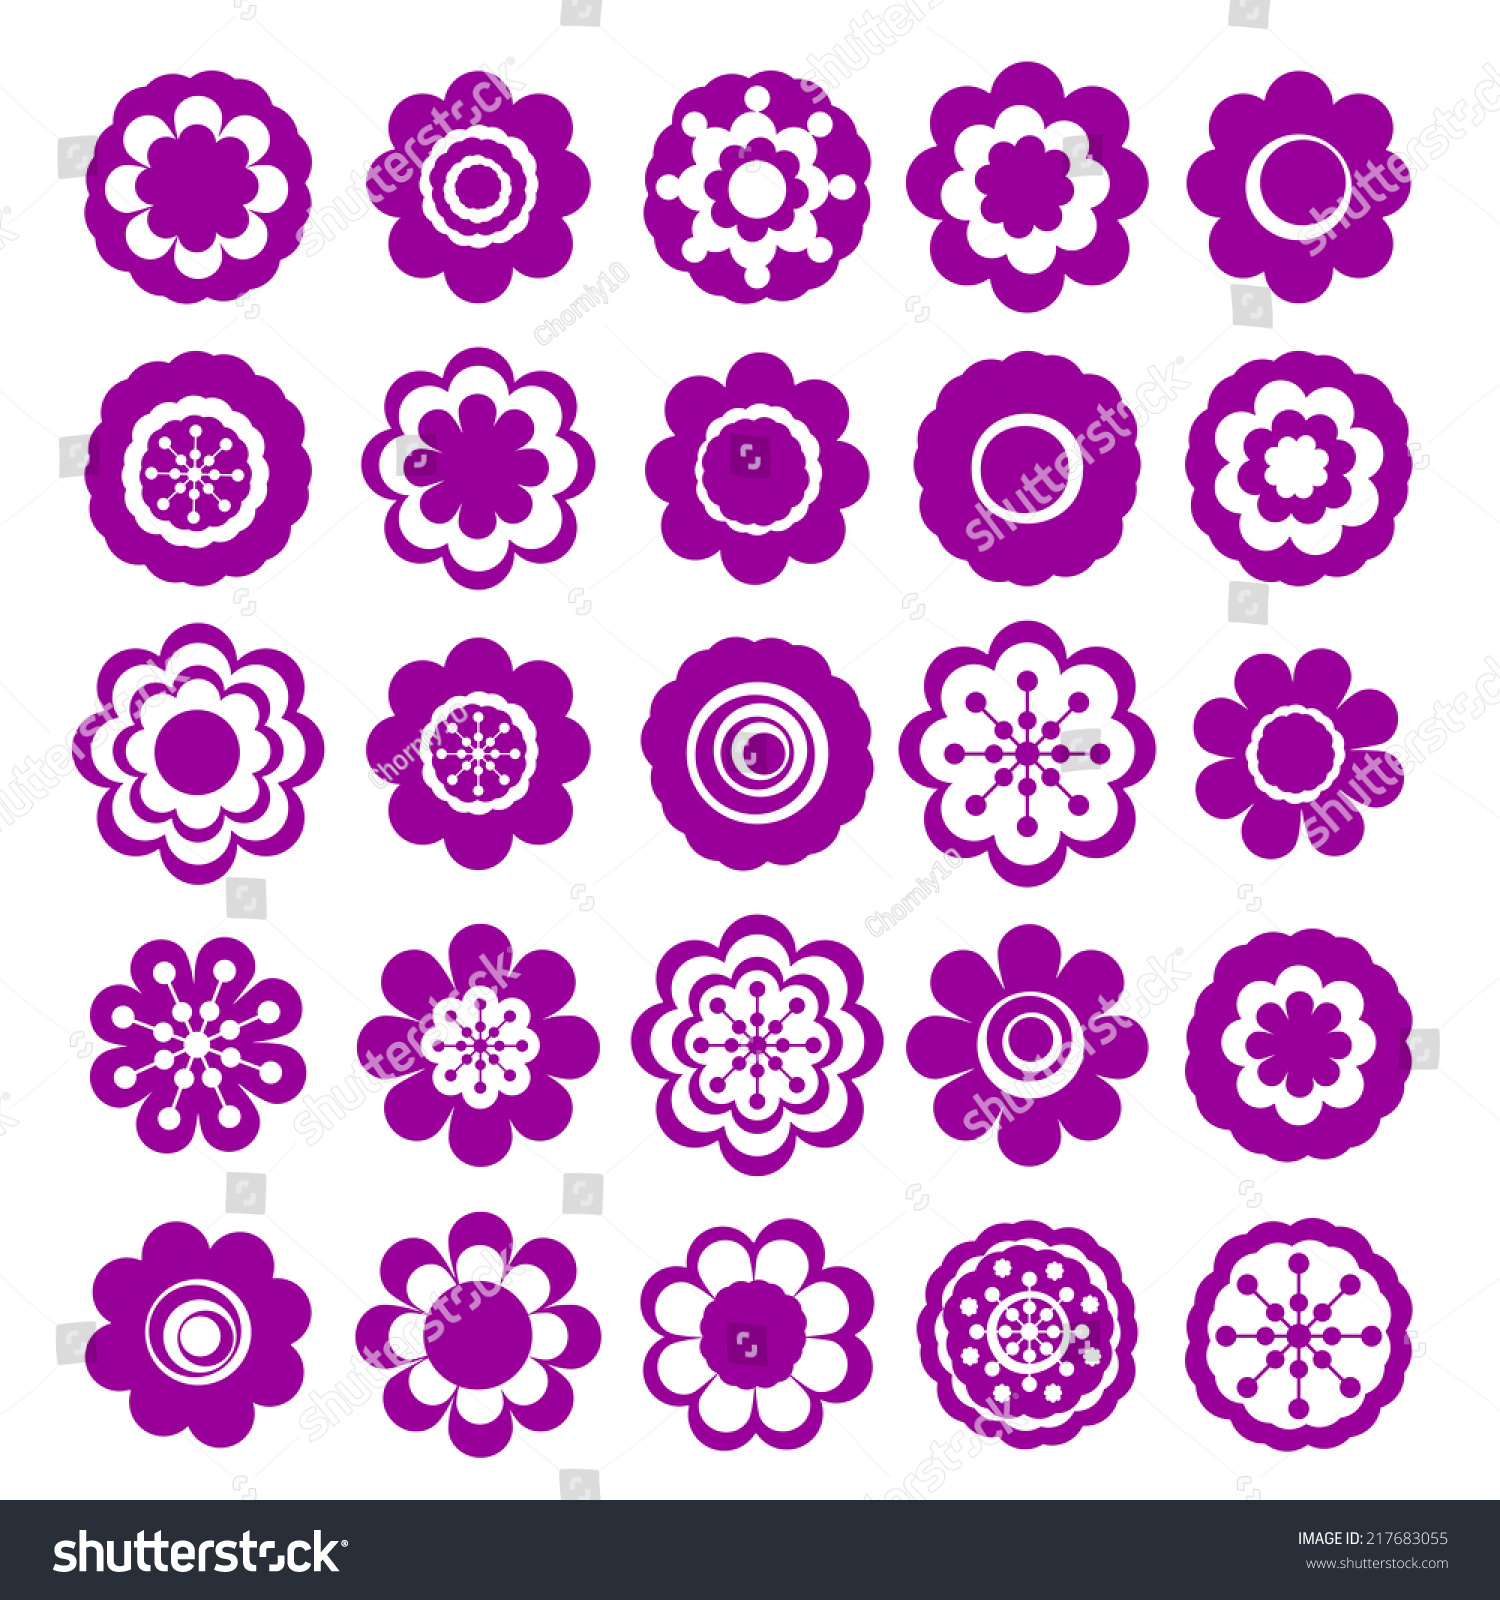 Realistic paper sticker: set of flowers. Isolated illustration icon #217683055